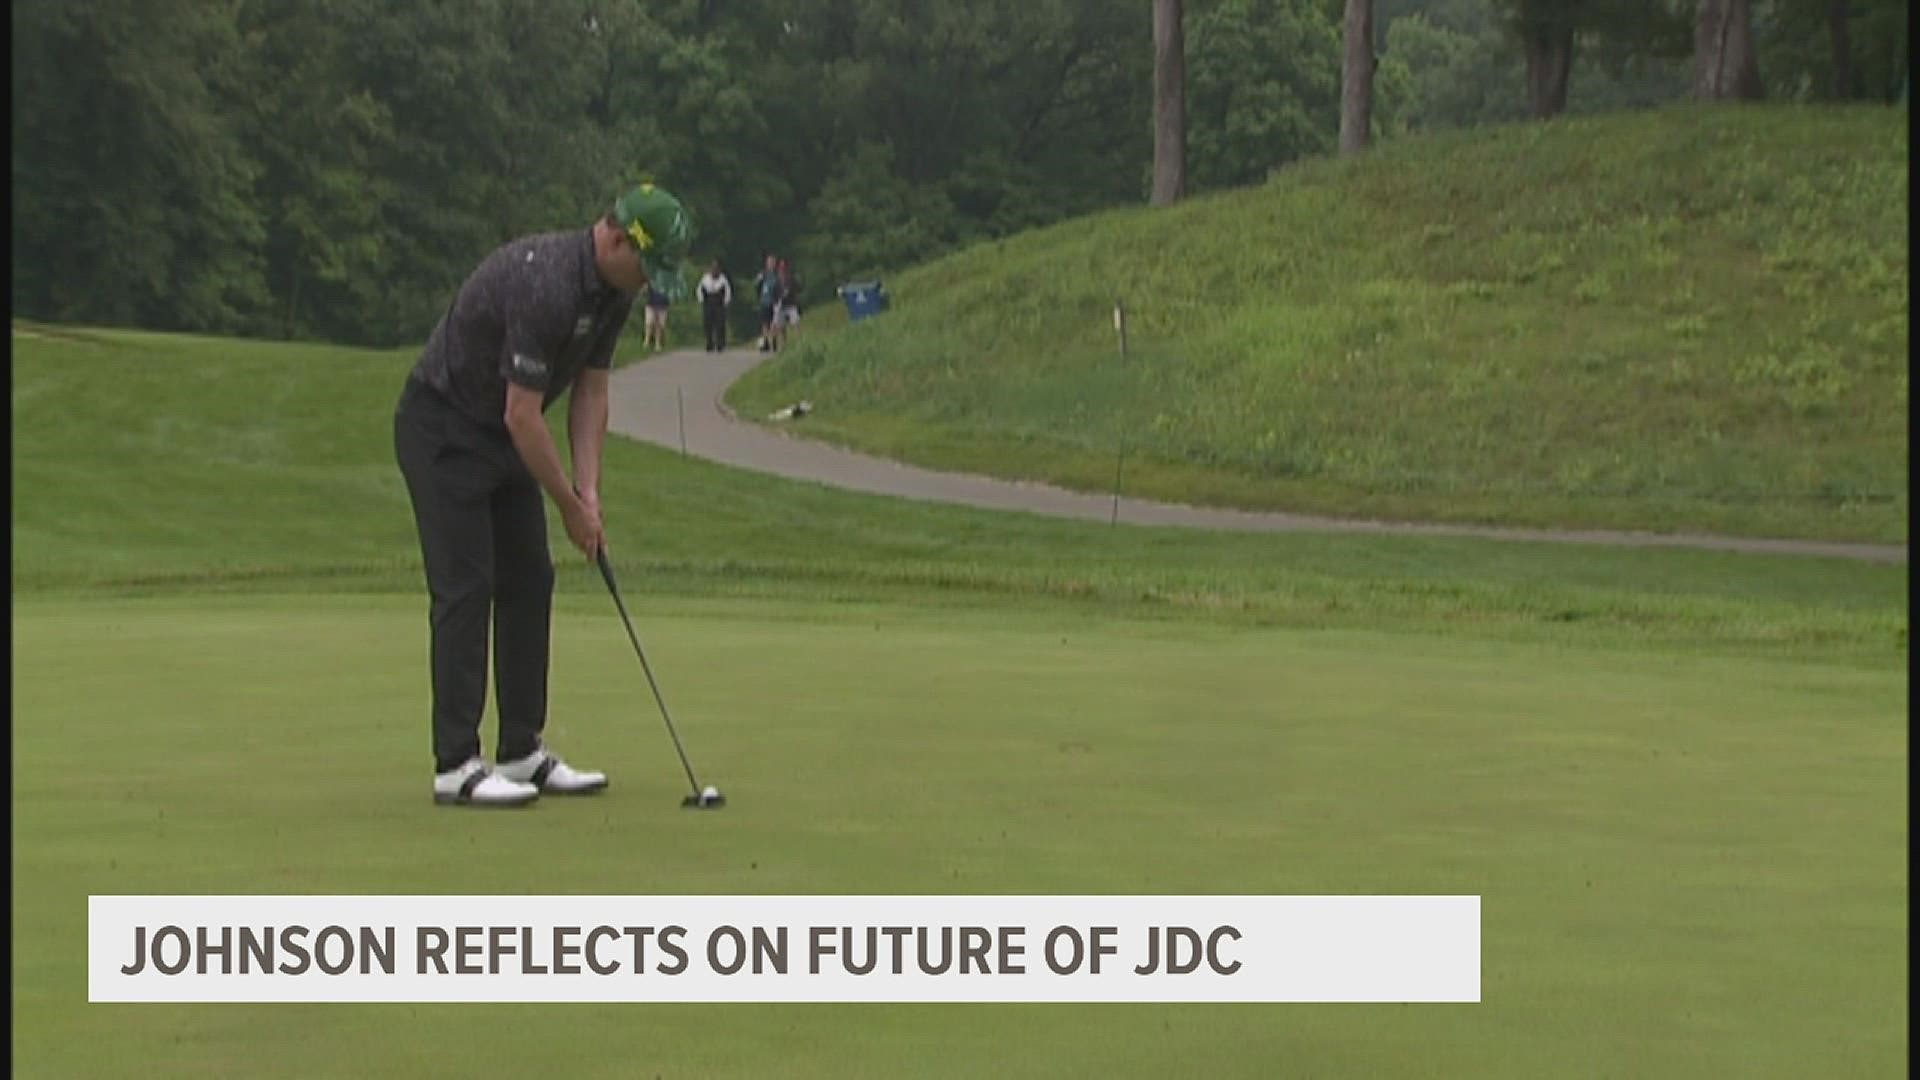 The 2012 JDC champion voiced his thoughts on the challenges facing the tournament and the effects they will have on its future.